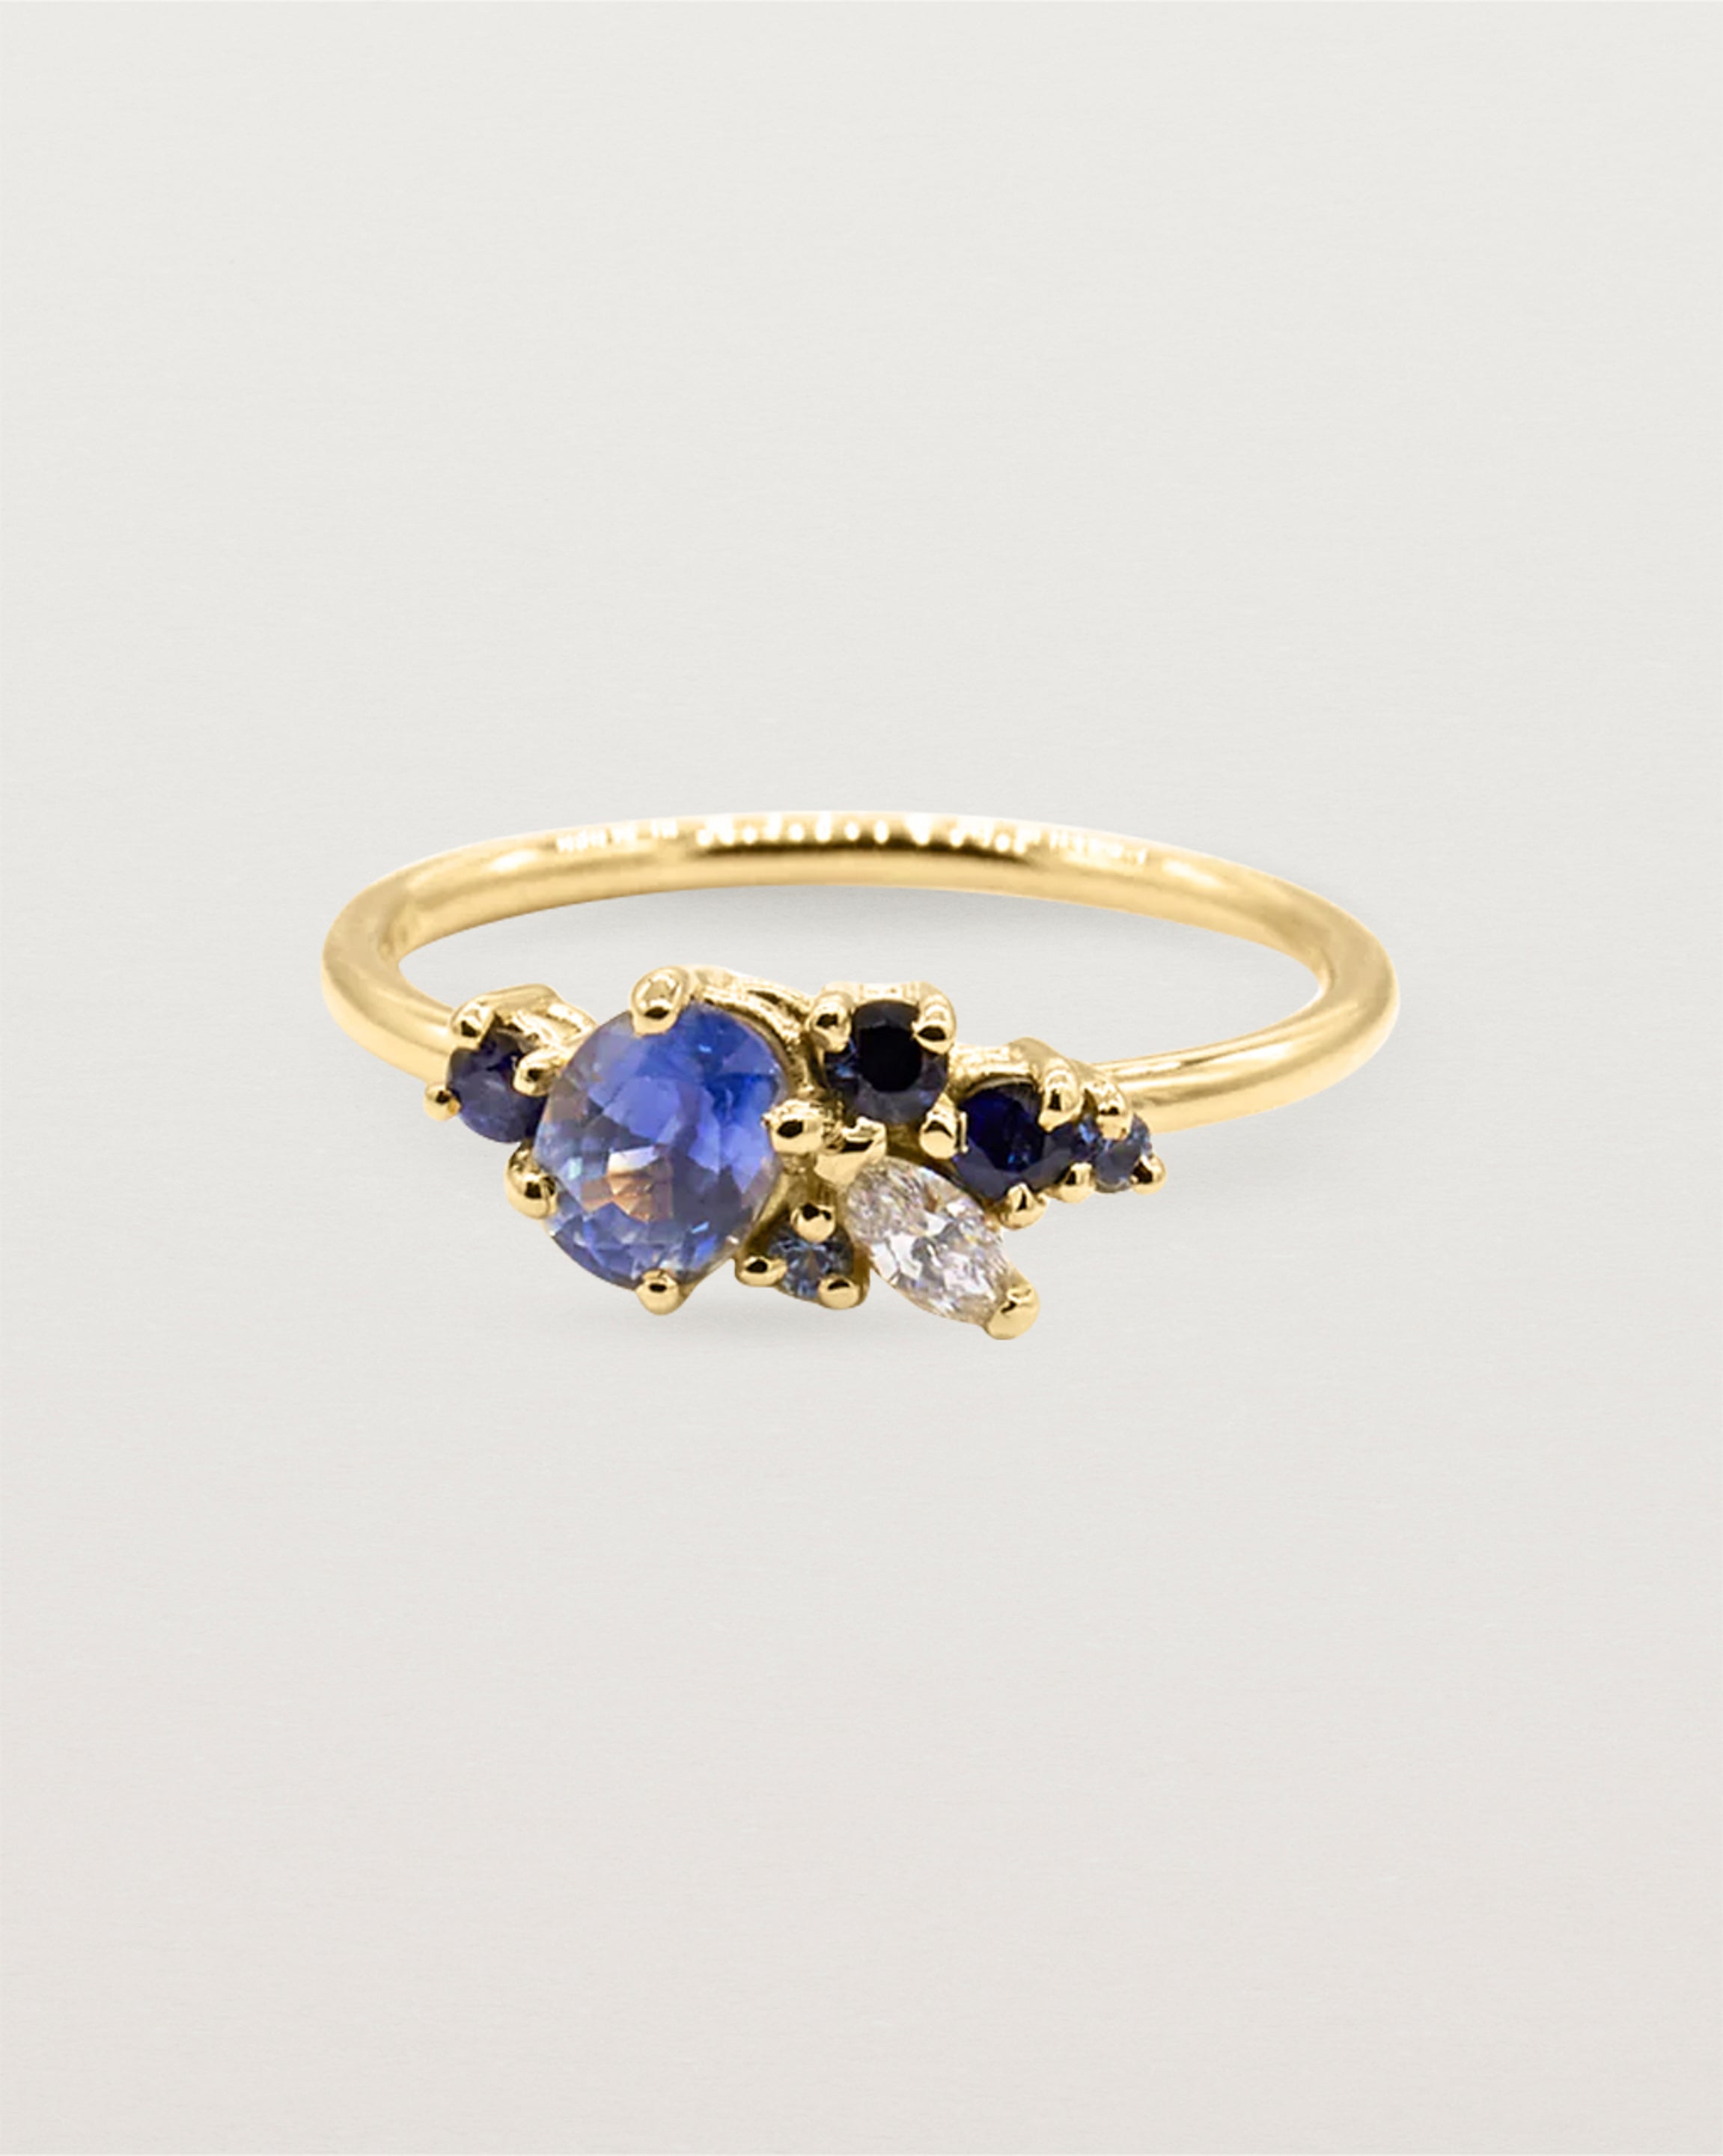 A diamond and sapphire cluster ring, featuring oval marquise and round stones, crafted in 18ct yellow gold